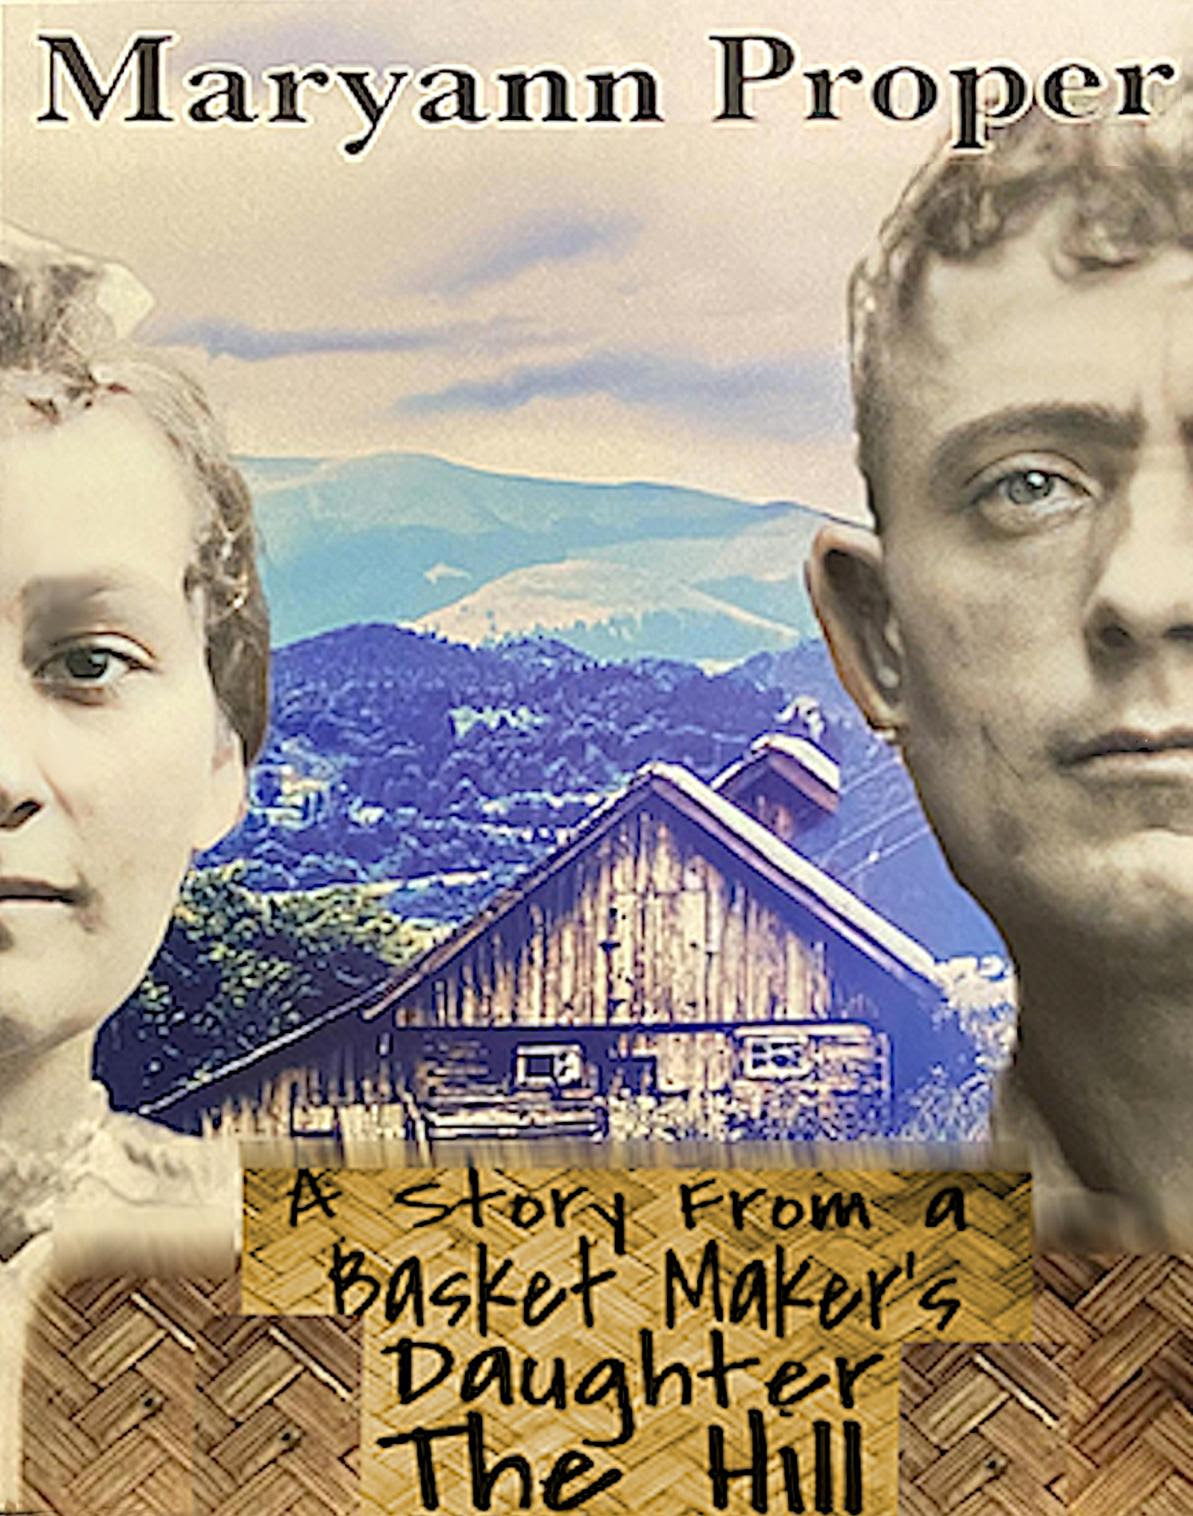 Bookcover of "A Story from a Basket Maker's Daughter: The Hill